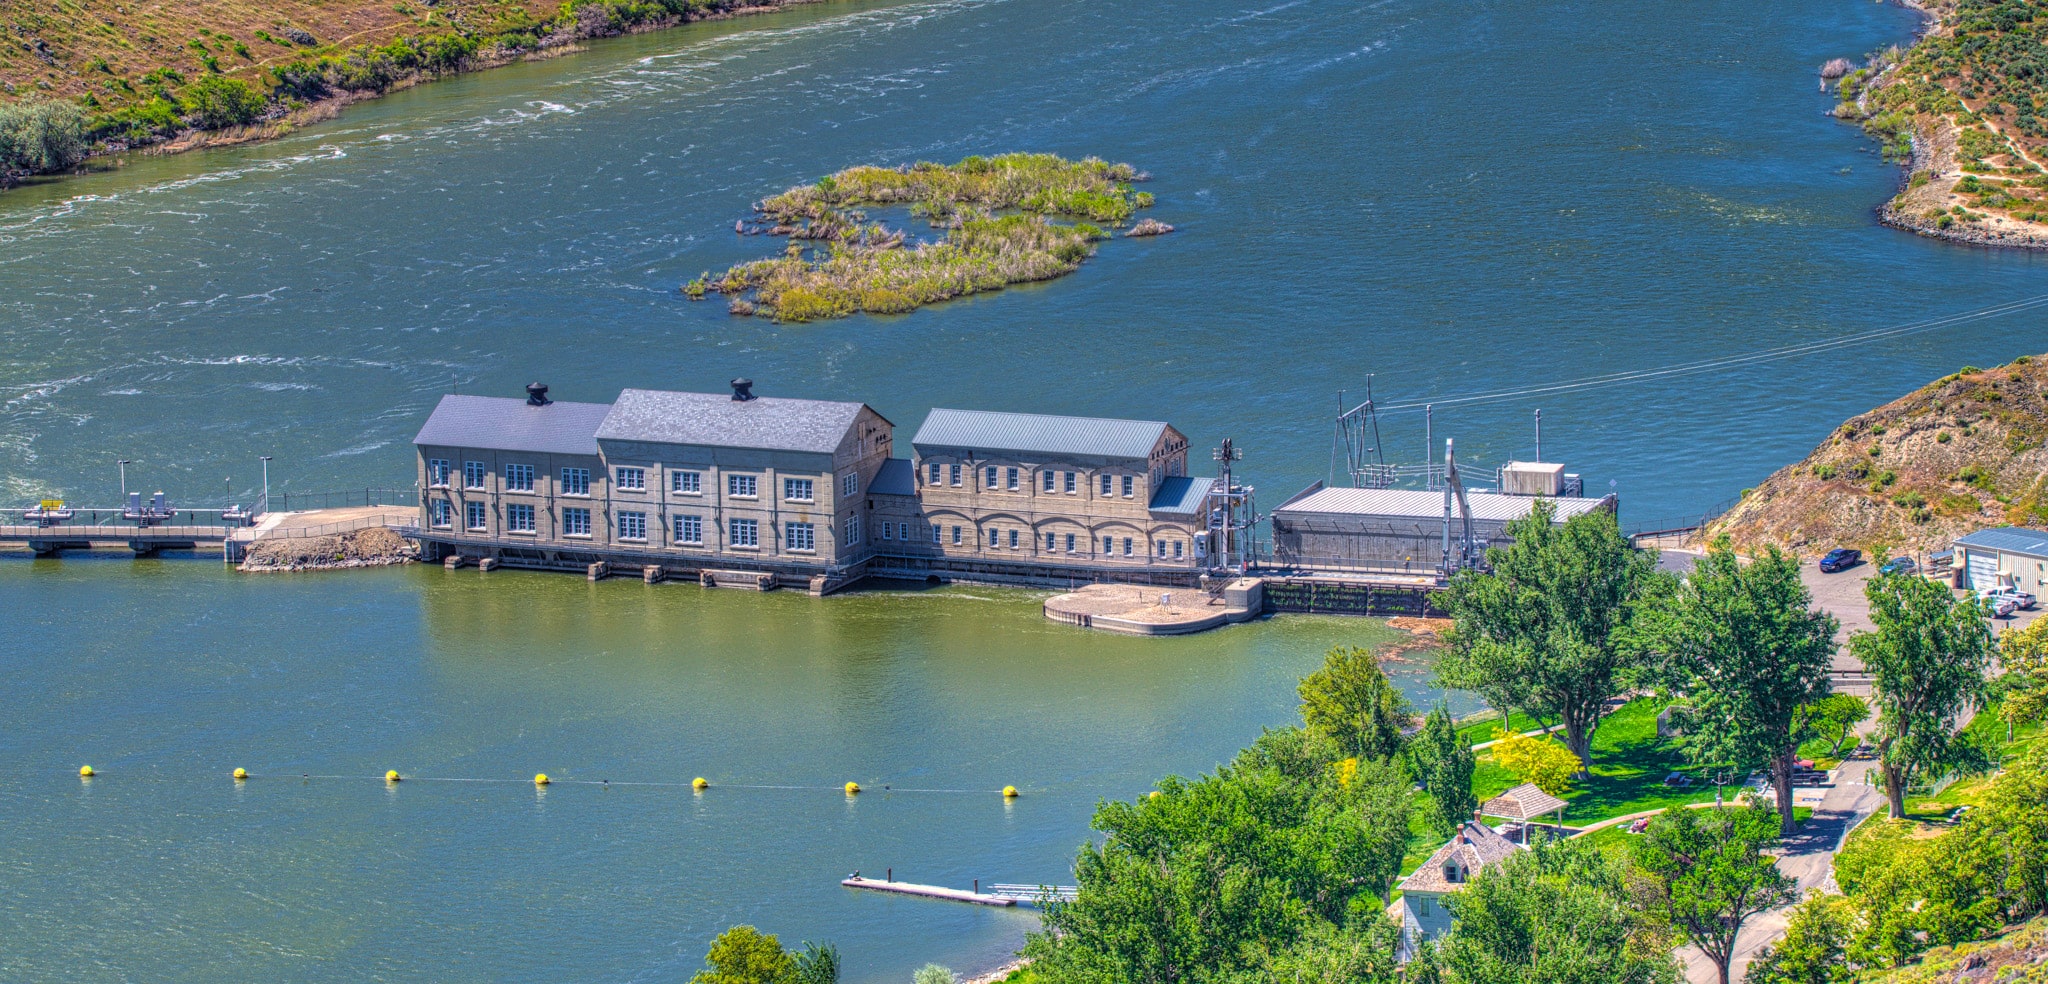 A panoramic view of the Swan Falls power station on the Snake River in the Morley Nelson Snake River Birds of Prey National Conservation Area south of Boise, Idaho.